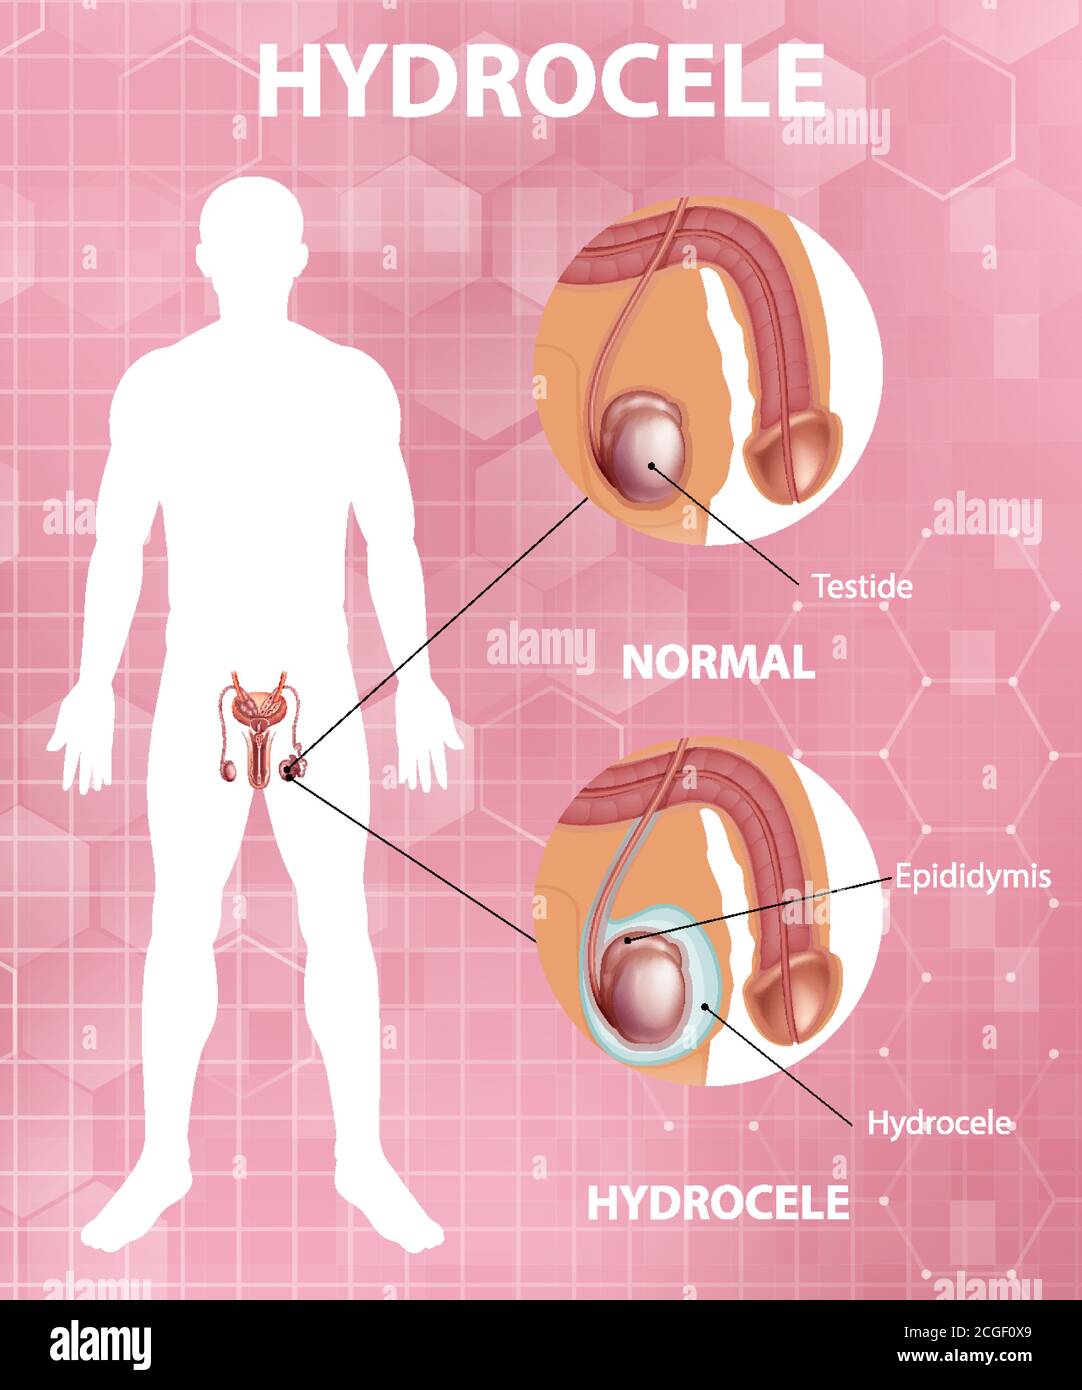 Medical poster showing different between male normal testicle and hydrocele illustration Stock Vector